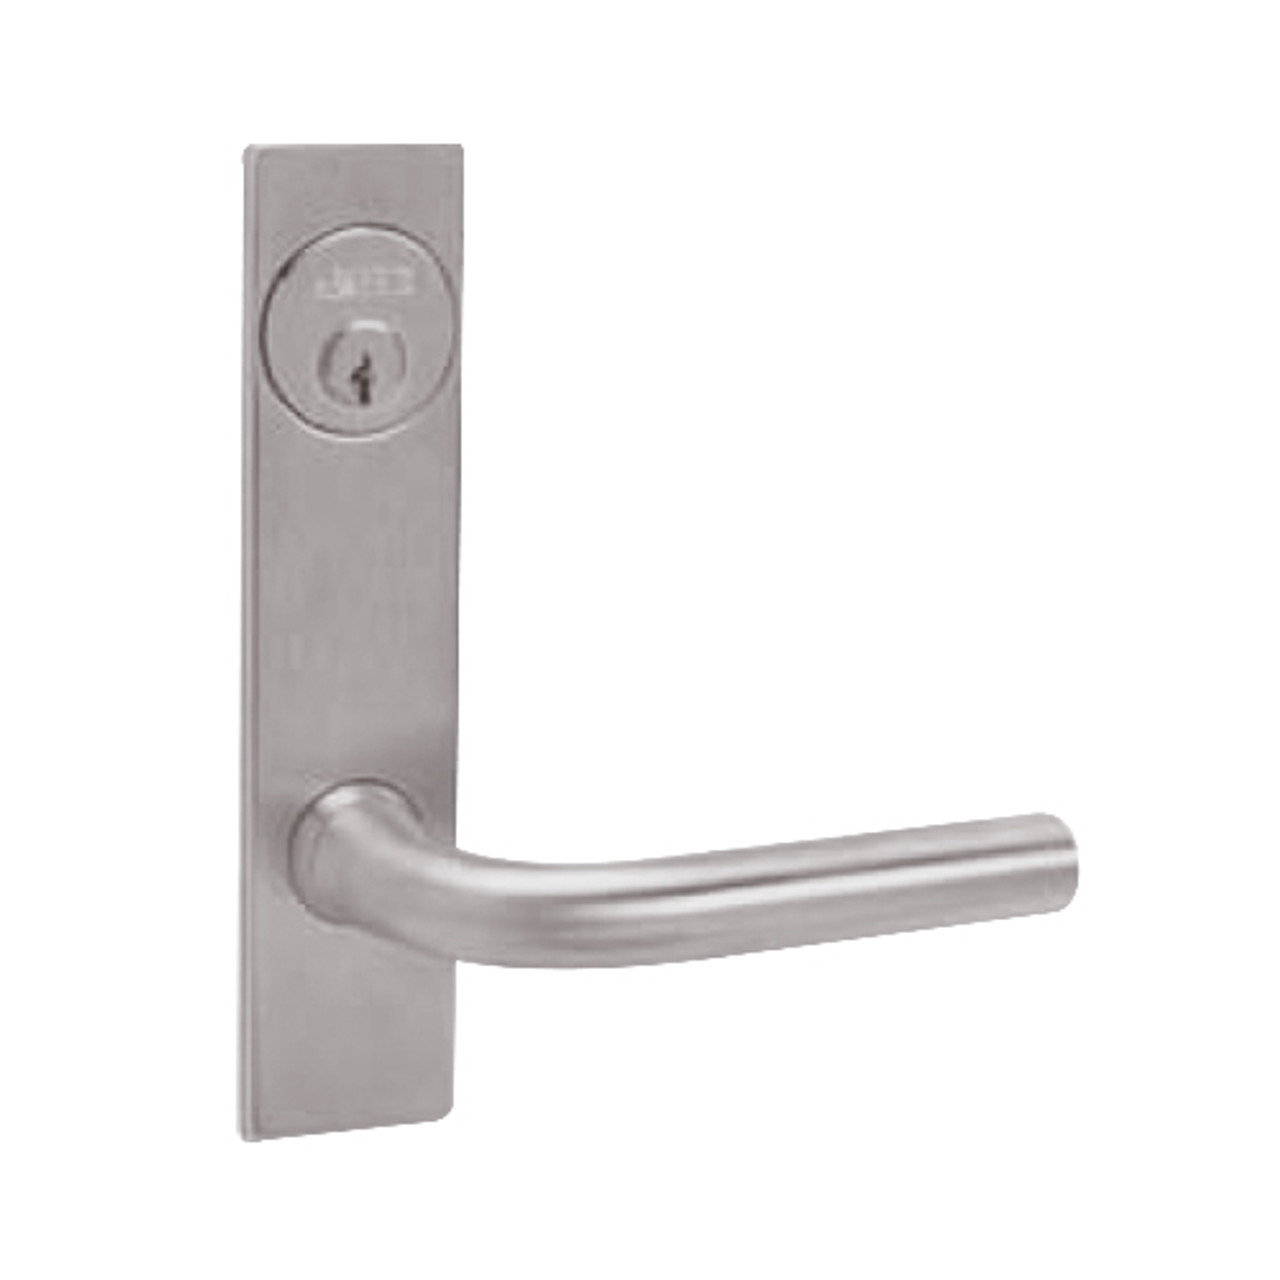 ML2048-RWM-630 Corbin Russwin ML2000 Series Mortise Entrance Locksets with Regis Lever and Deadbolt in Satin Stainless